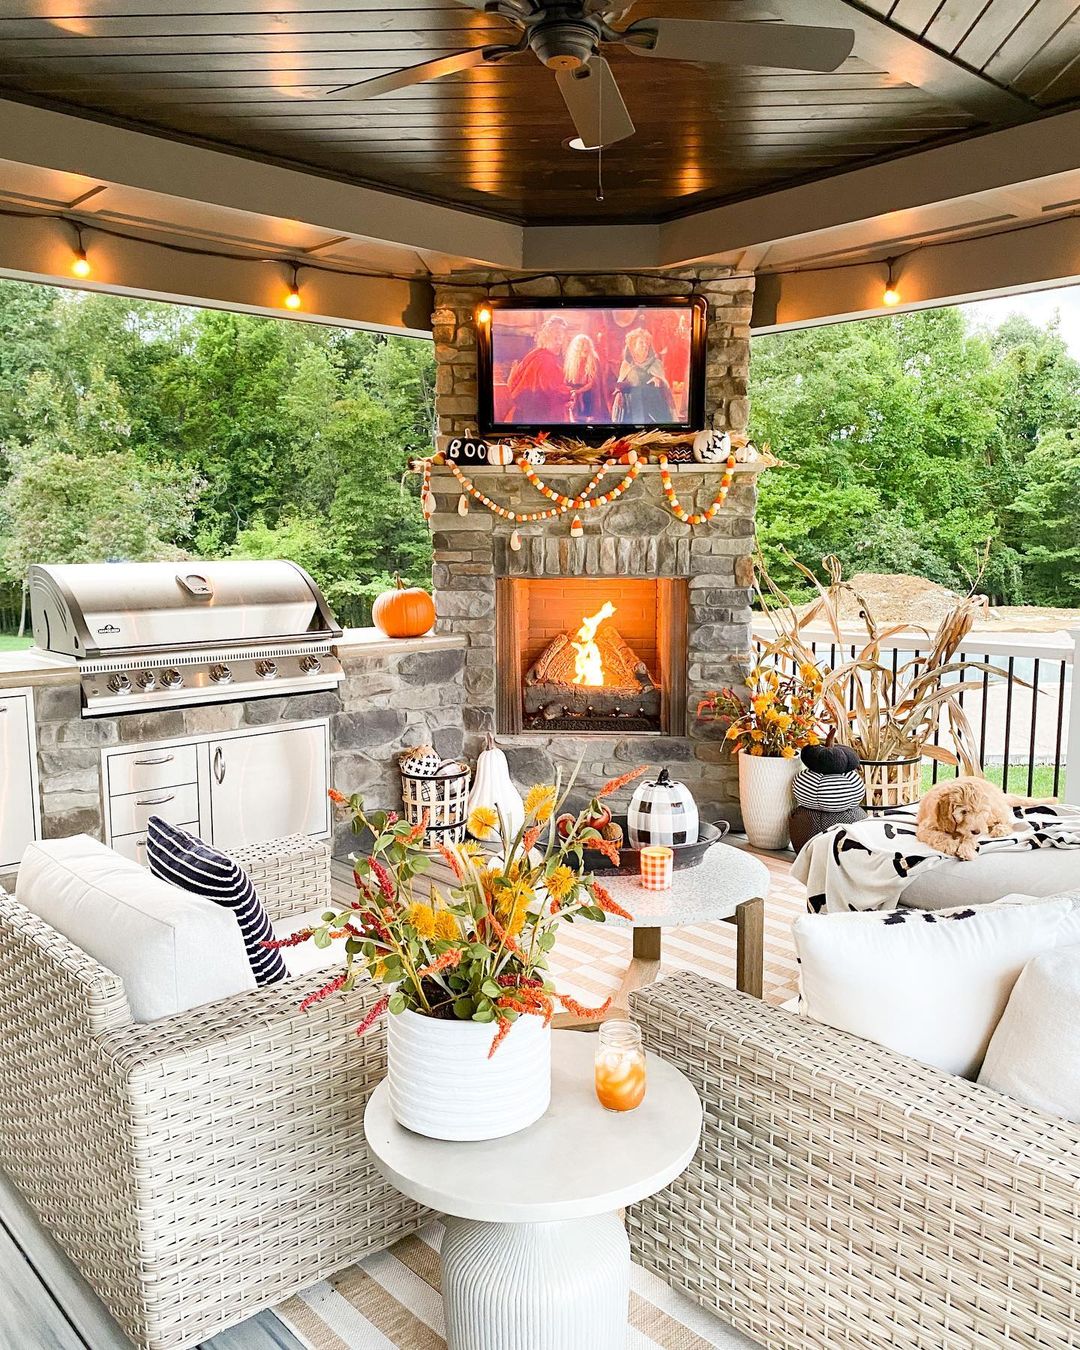 Outdoor Entertainment with TV